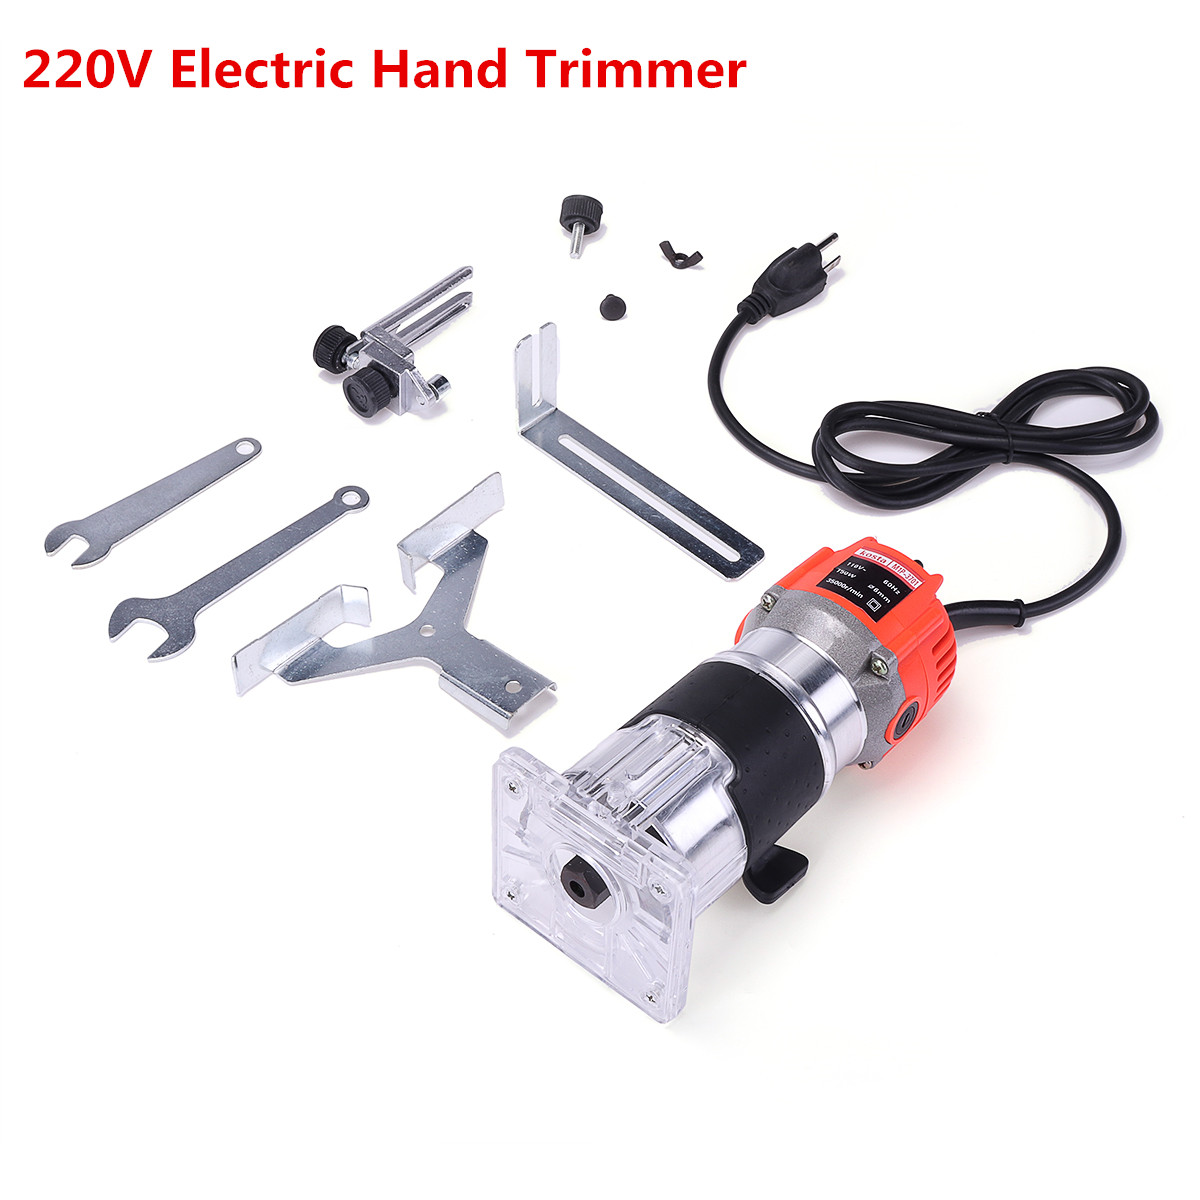 1200W-220V-635mm-14quot-Electric-Hand-Trimmer-Wood-Laminate-Palm-Router-Joiner-Tool-1436024-3